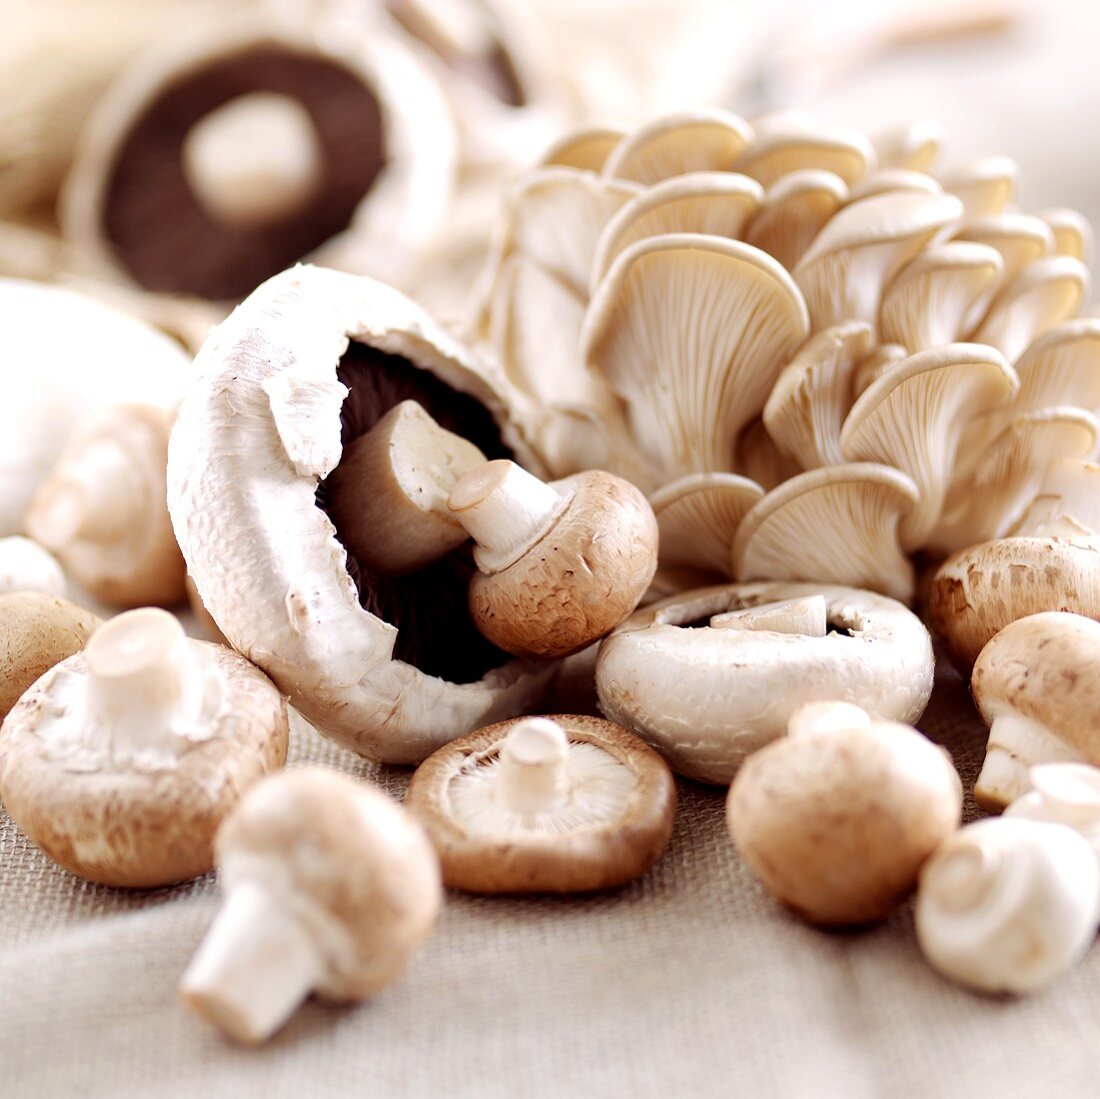 Still life with button mushrooms and oyster mushrooms